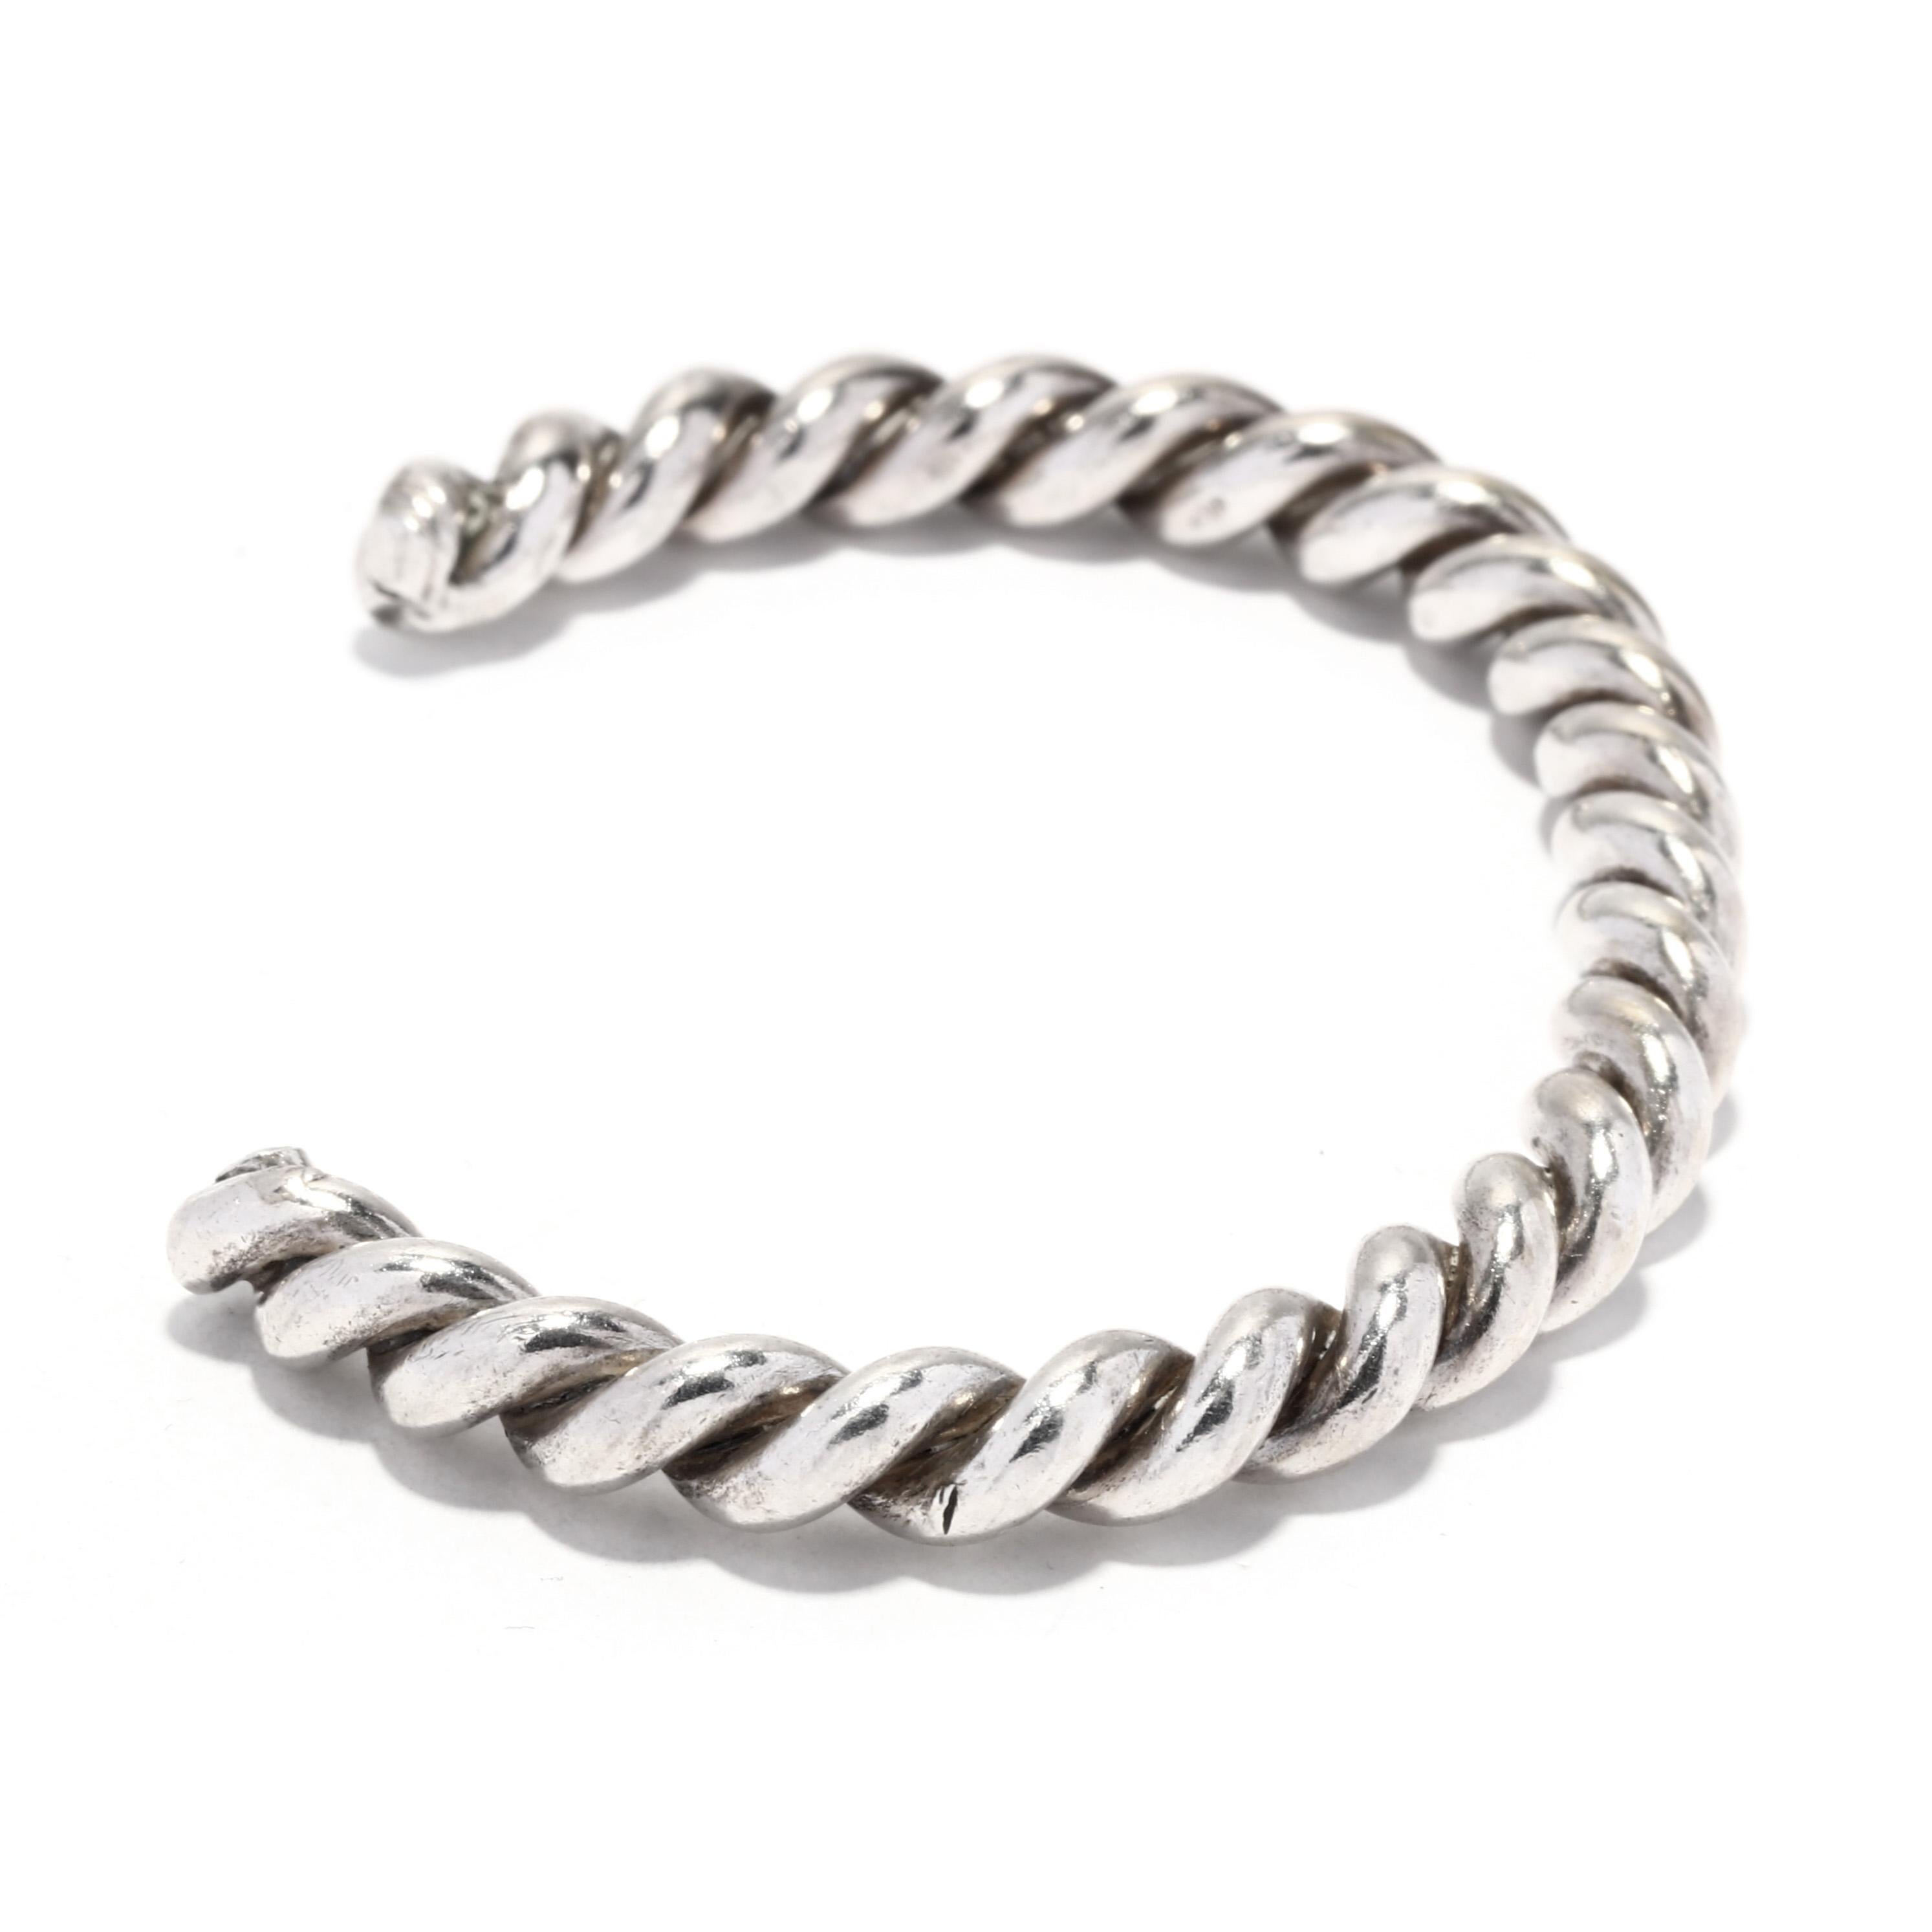 This classic sterling silver cable cuff bracelet is the perfect addition to any outfit. The slim design is made from sterling silver with a subtle twist detailing. It is 6.25 inches in length and is perfect for any occasion. This simple cuff